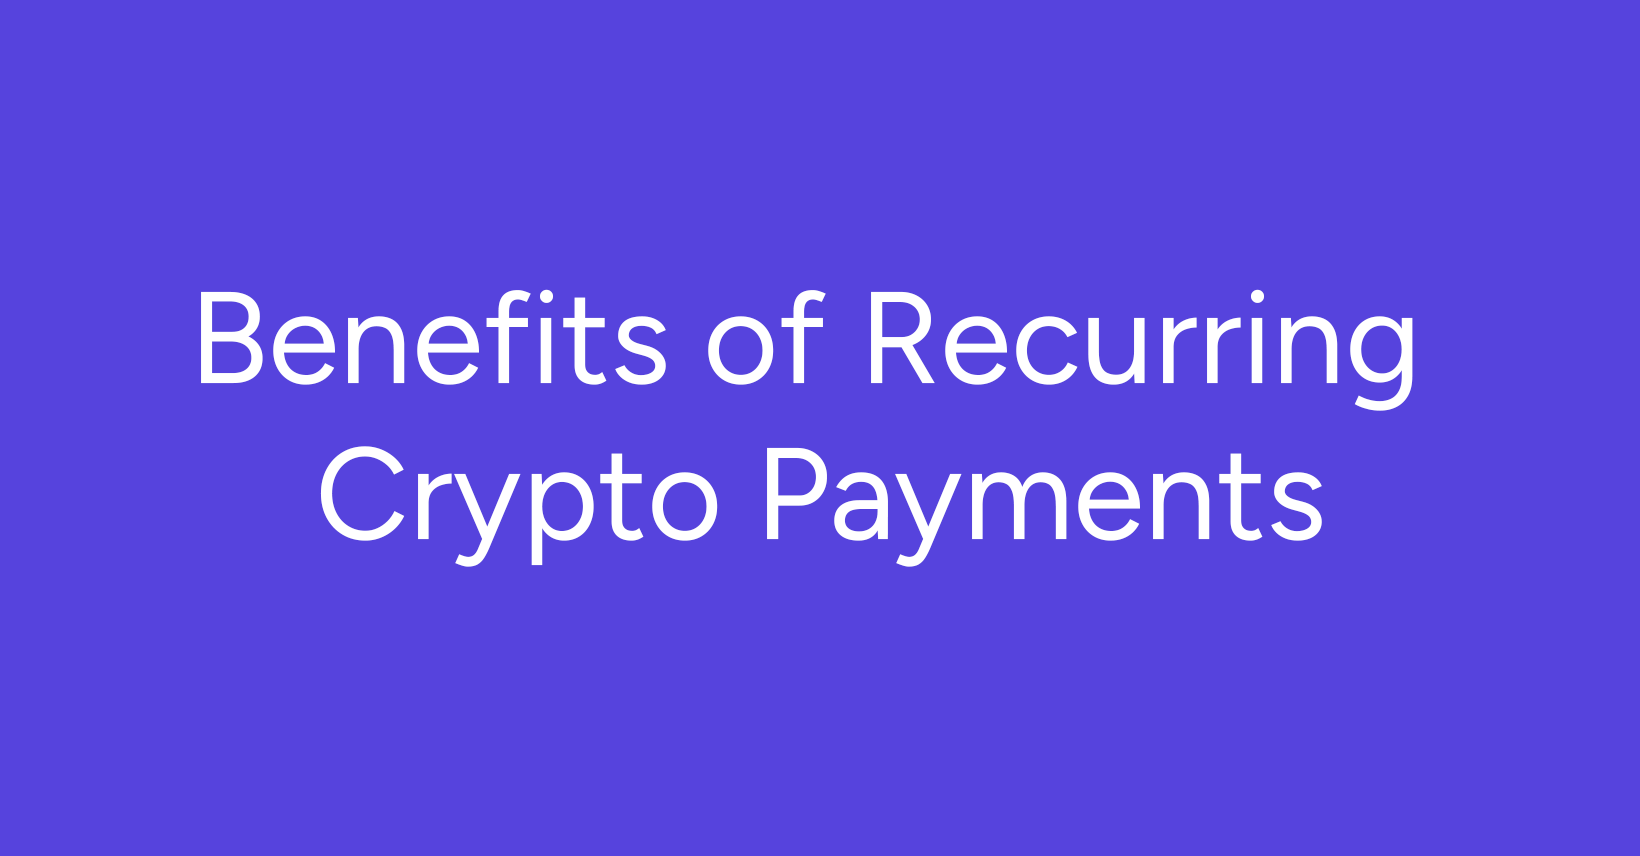 Benefits of Recurring Crypto Payments